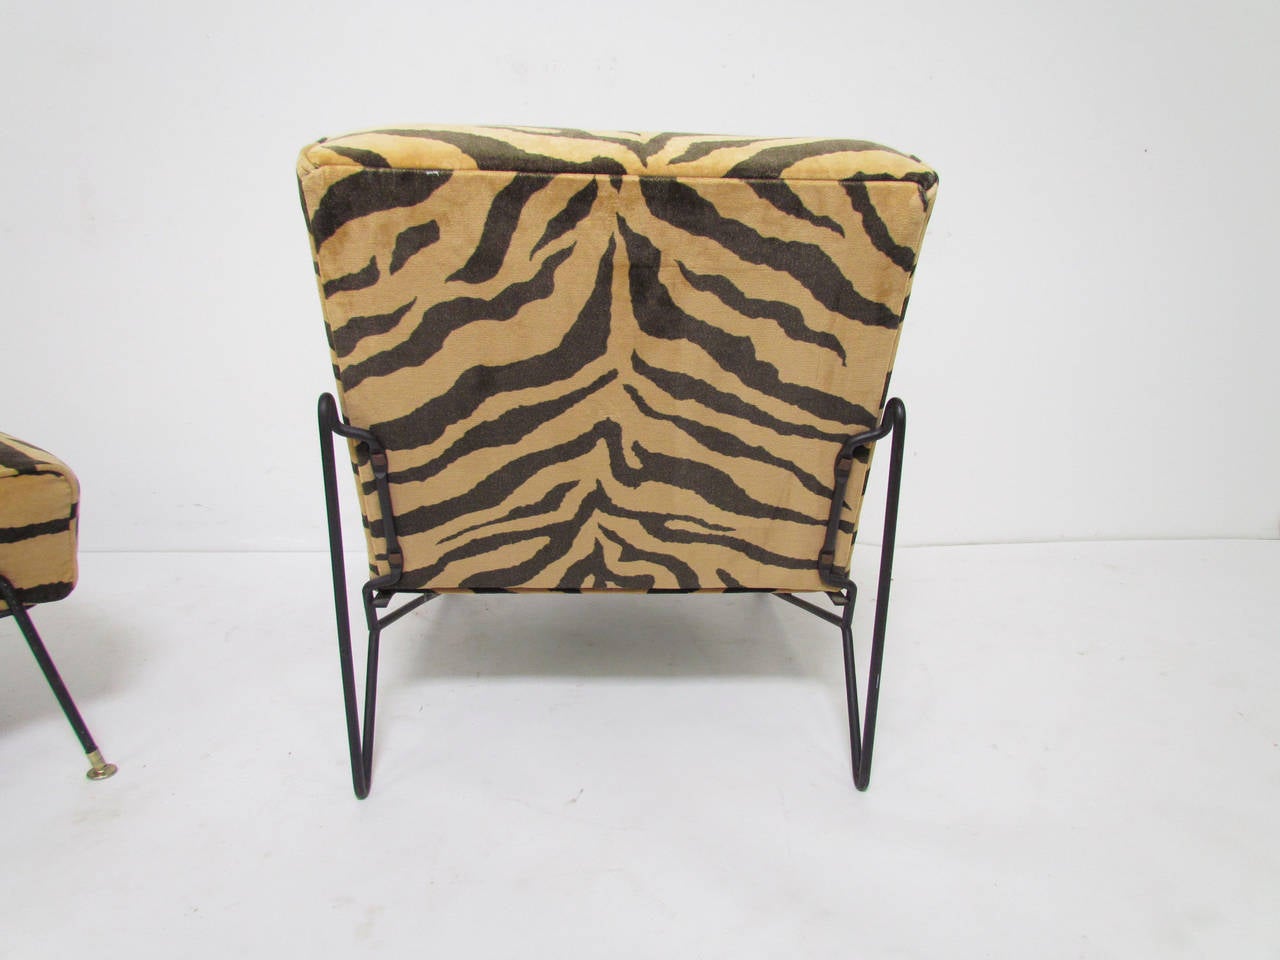 Upholstery Sculptural Wrought Iron Lounge Chair and Ottoman by Dorothy Schindele